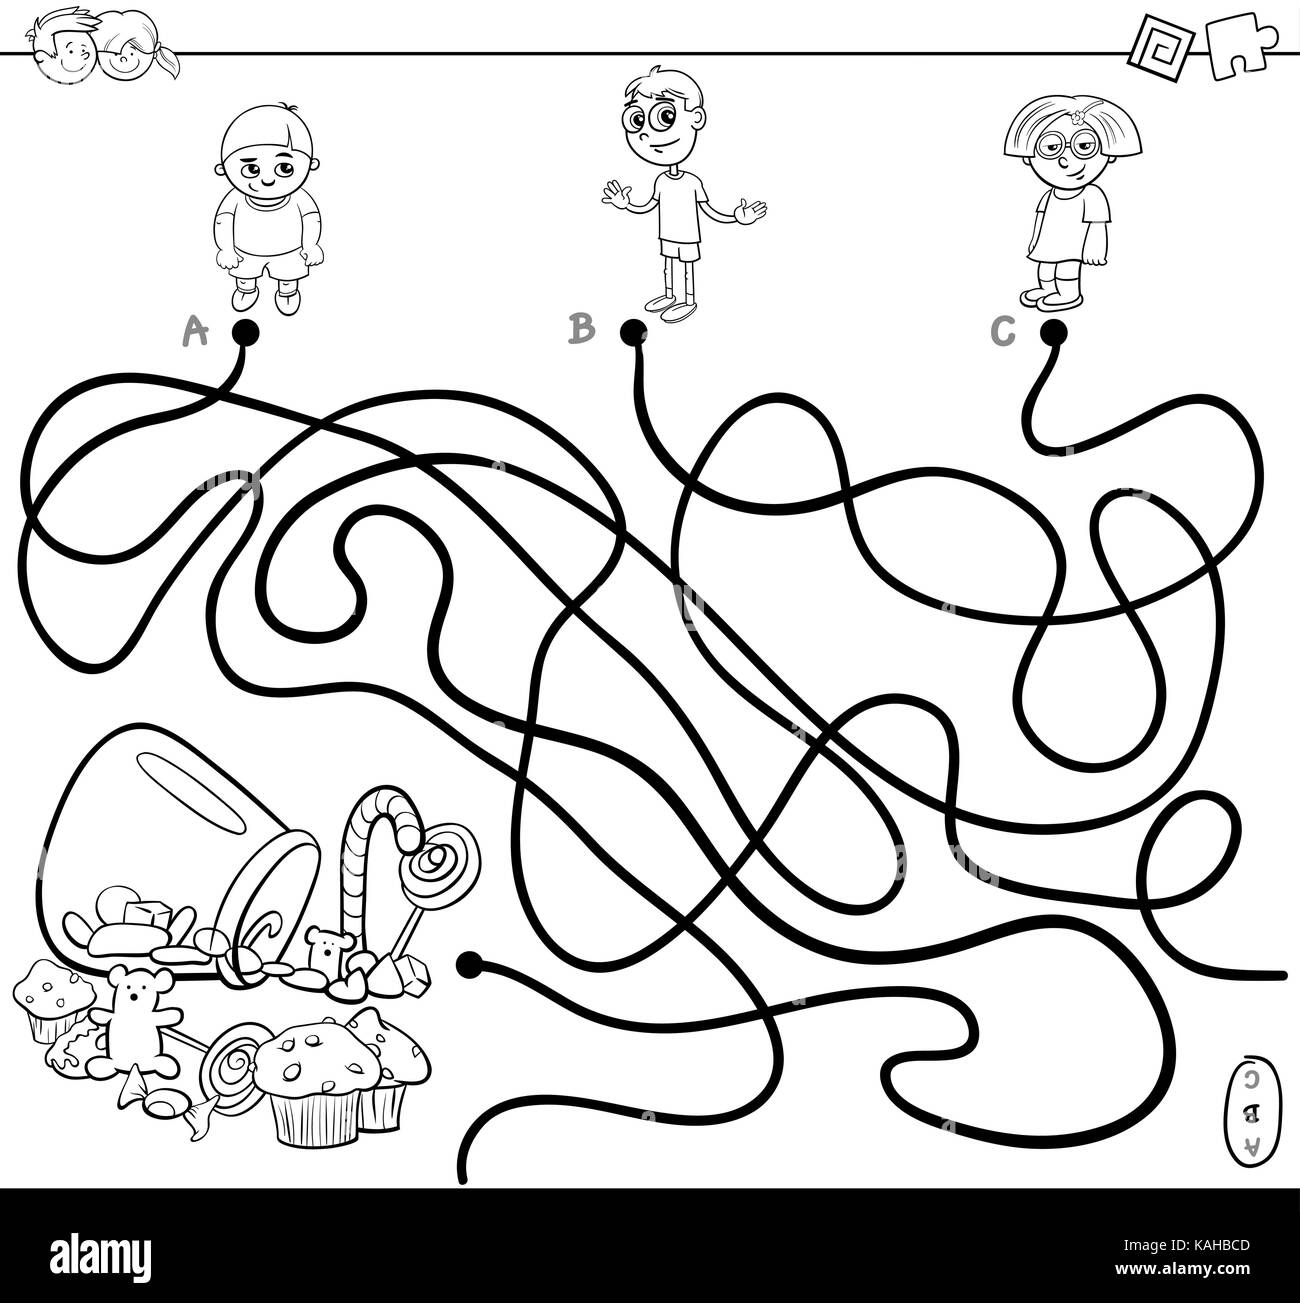 Black and White Cartoon Illustration of Paths or Maze Puzzle Activity Game with Children Characters and Sweet Food Coloring Book Stock Vector